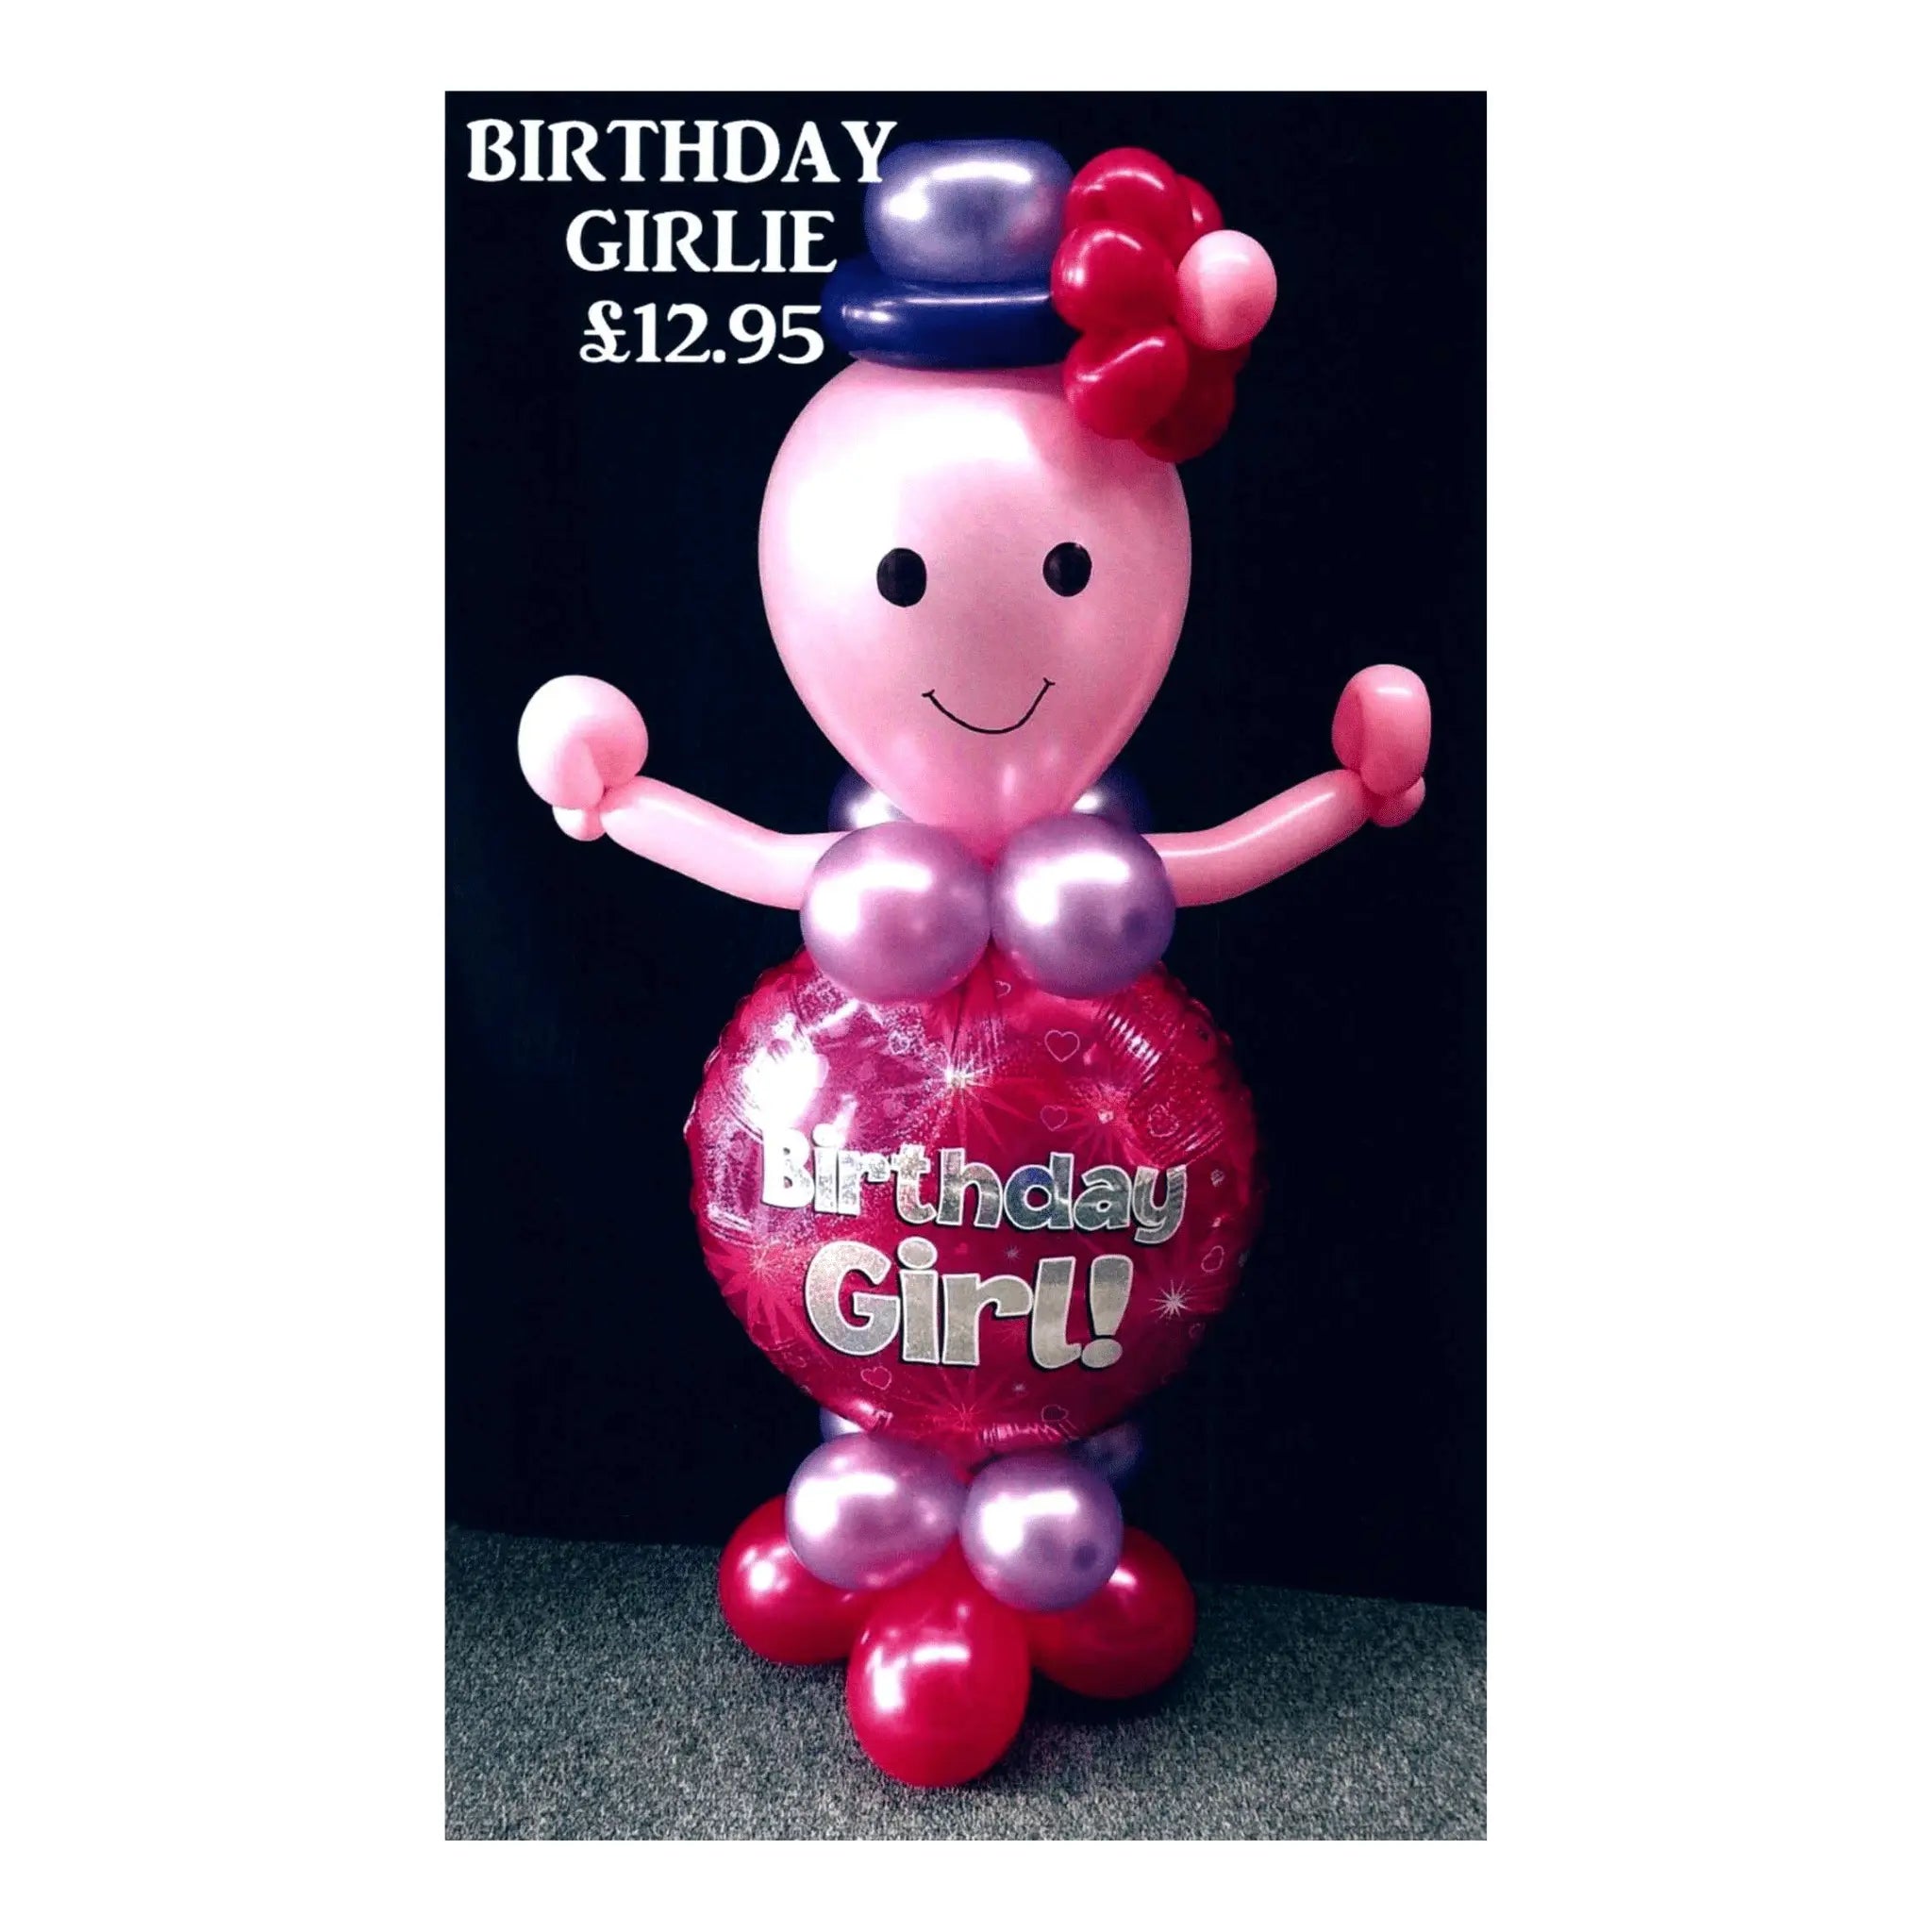 Birthday Girlie Balloon Character | The Party Hut